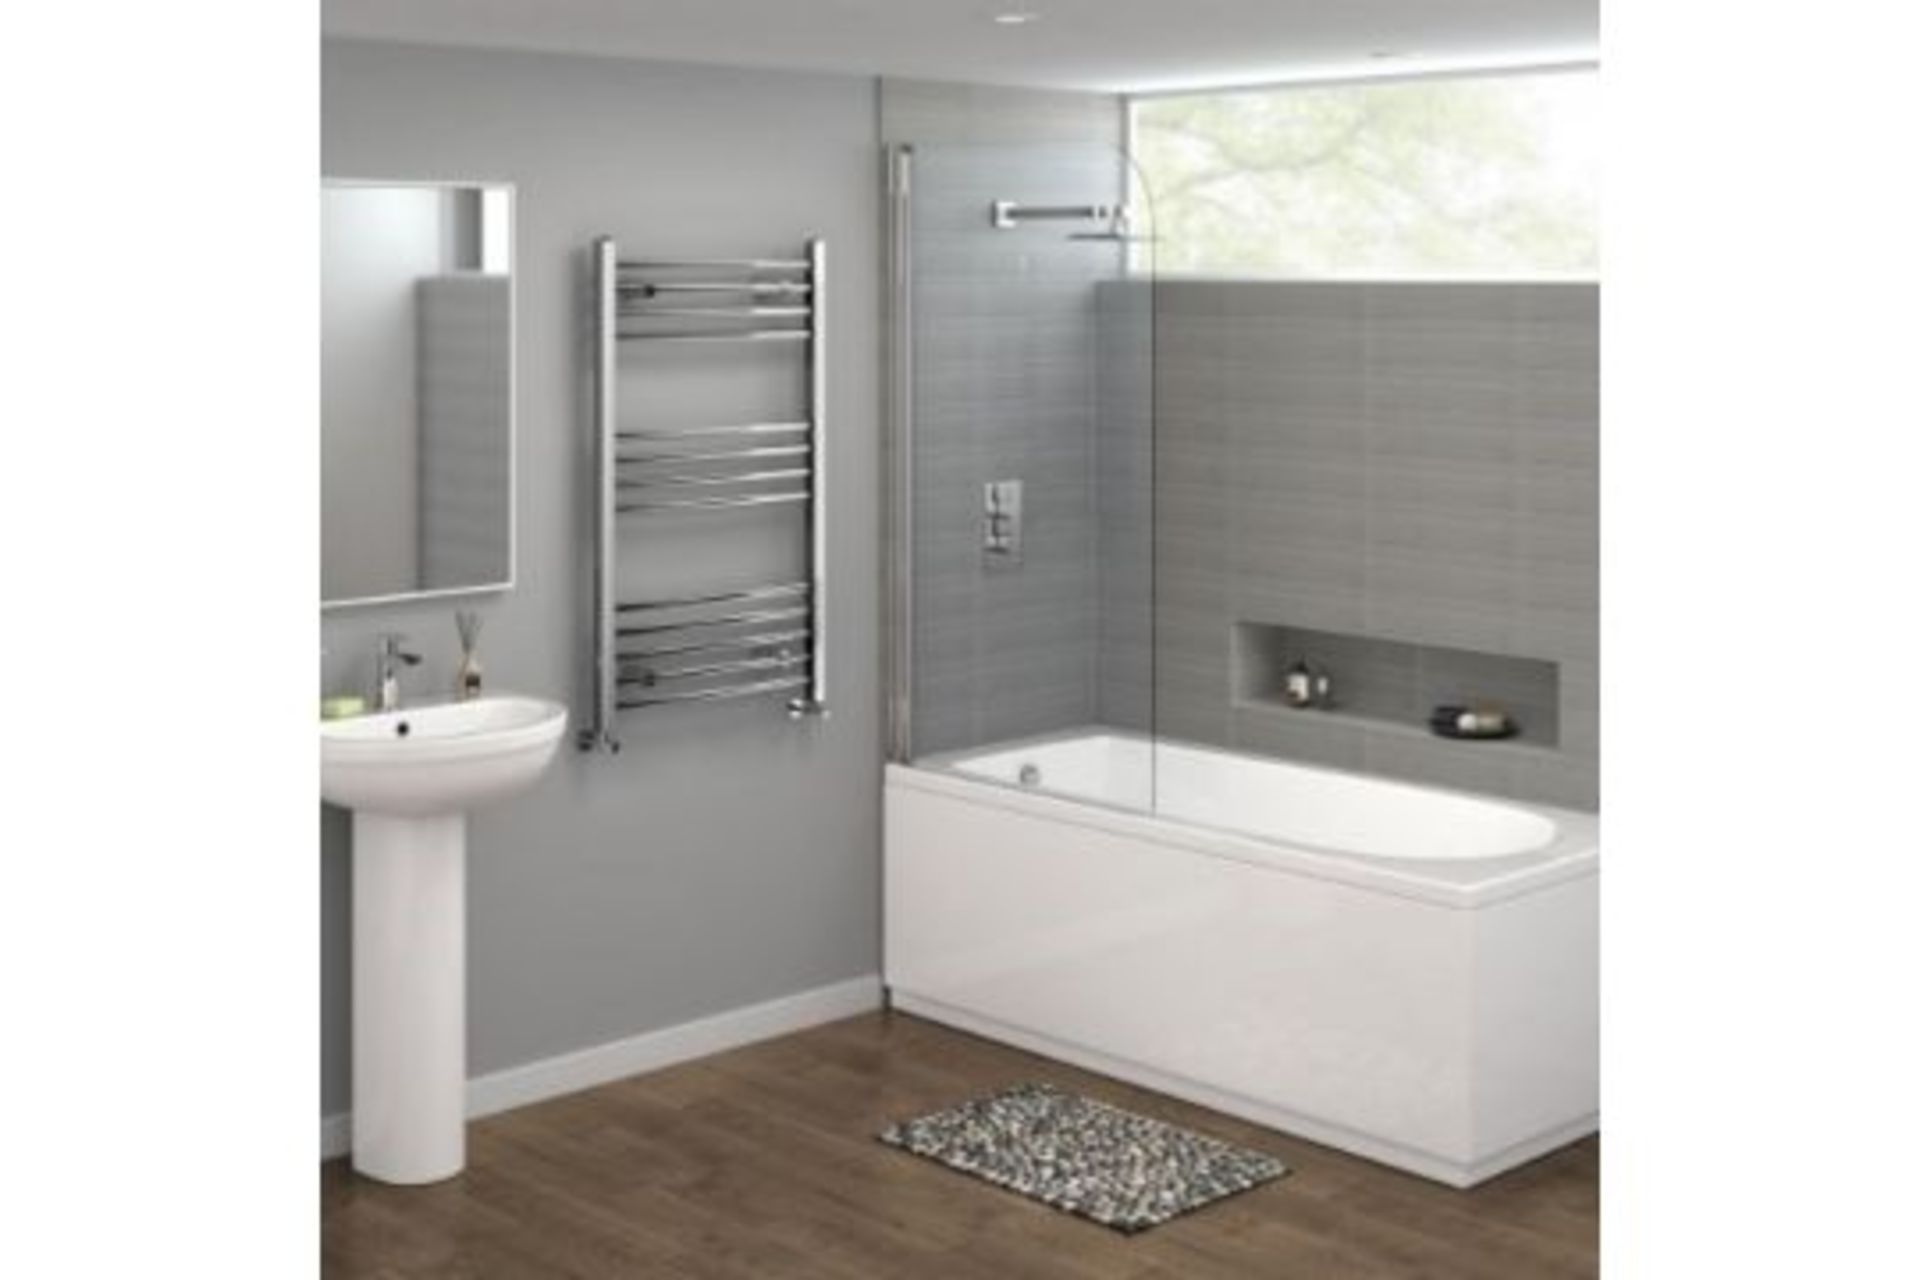 Brand New 1200x600mm - 20mm Tubes - RRP £219.99.Chrome Curved Rail Ladder Towel Radiator.Our Nancy 1 - Image 2 of 2